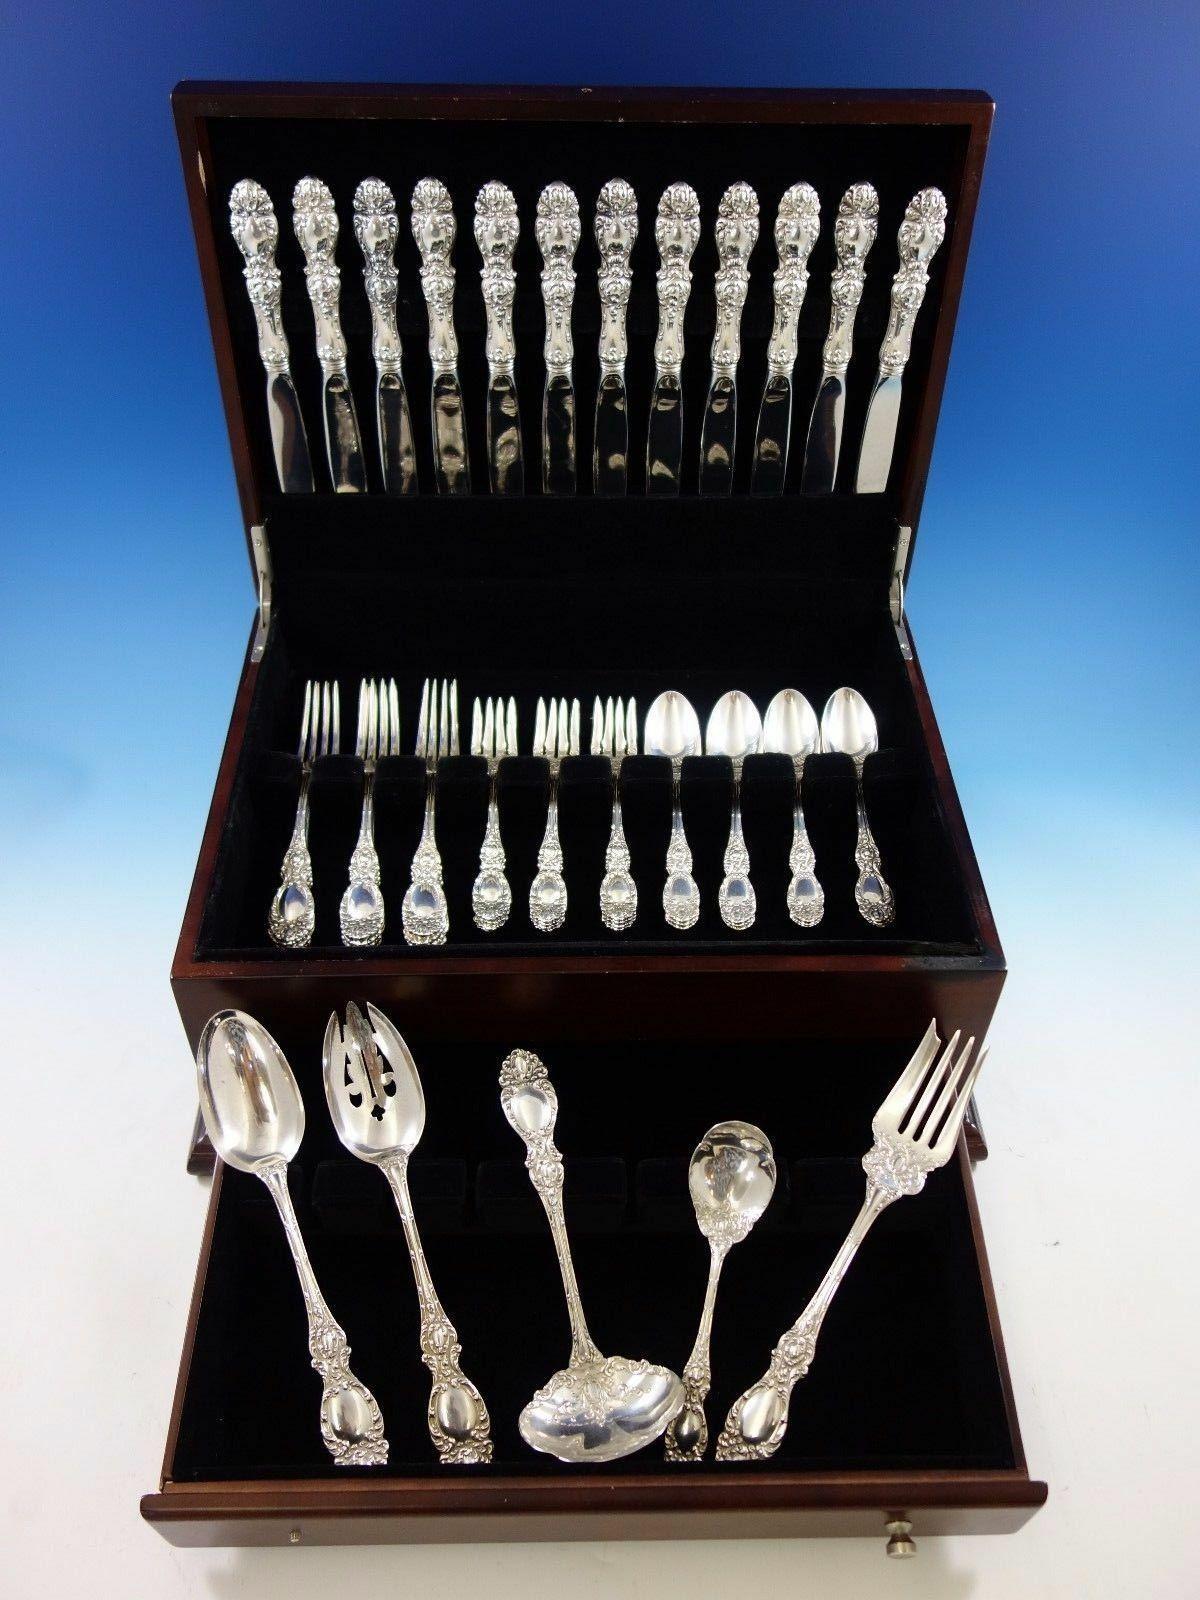 Lucerne by Wallace sterling silver flatware set - 53 pieces. This pattern was introduced in the year 1896 and was discontinued in the year 1996. The pieces features beautiful scroll work with particularly lovely salad forks and serving pieces with